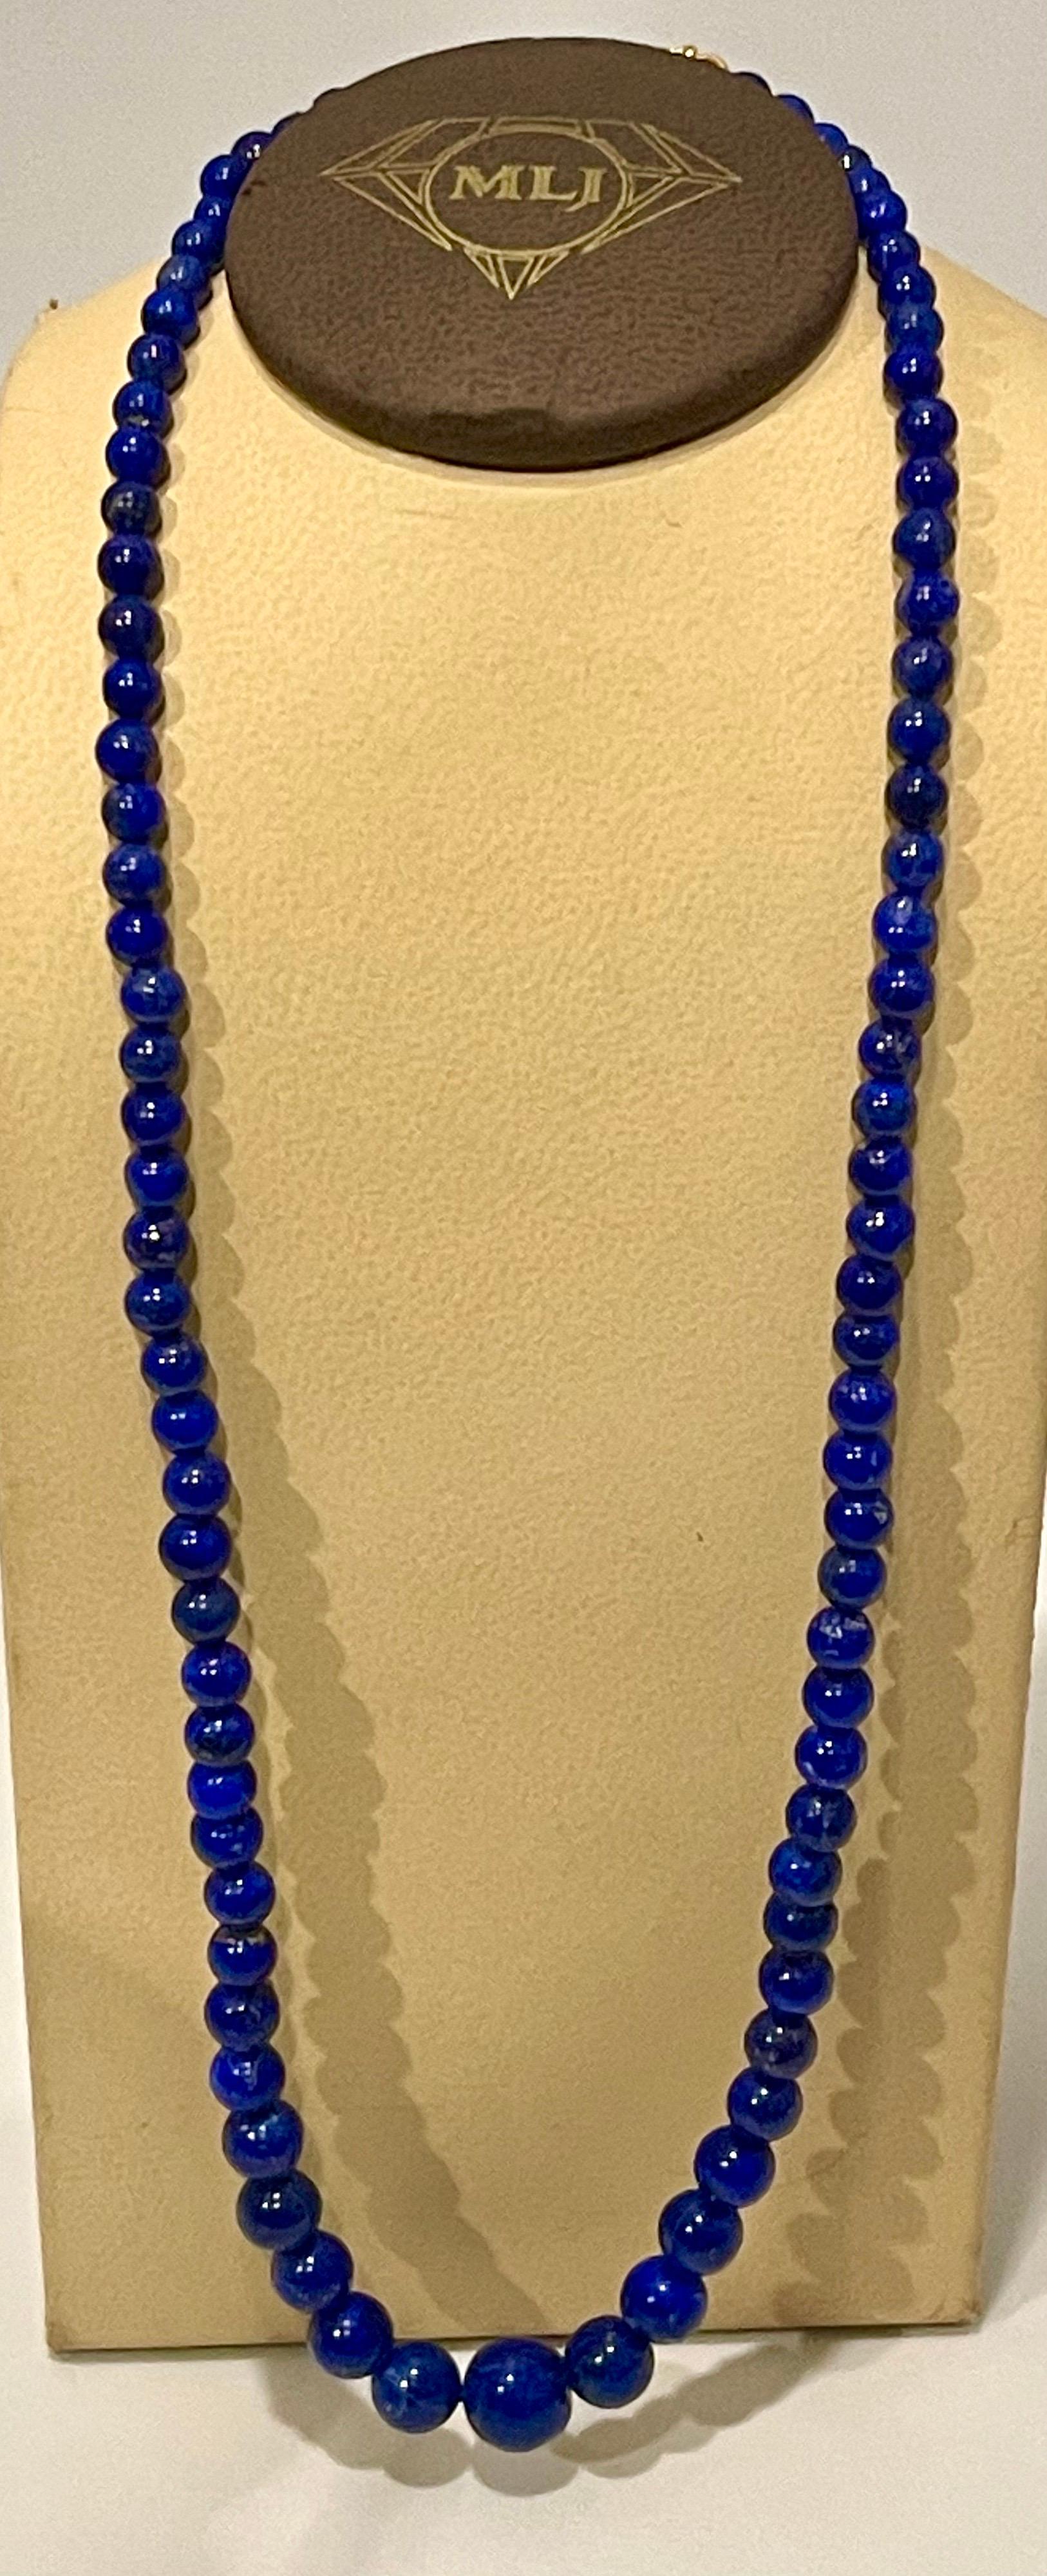 Vintage Lapis Lazuli Single Strand Necklace with 14 Karat Yellow Long Hook Clasp For Sale 3